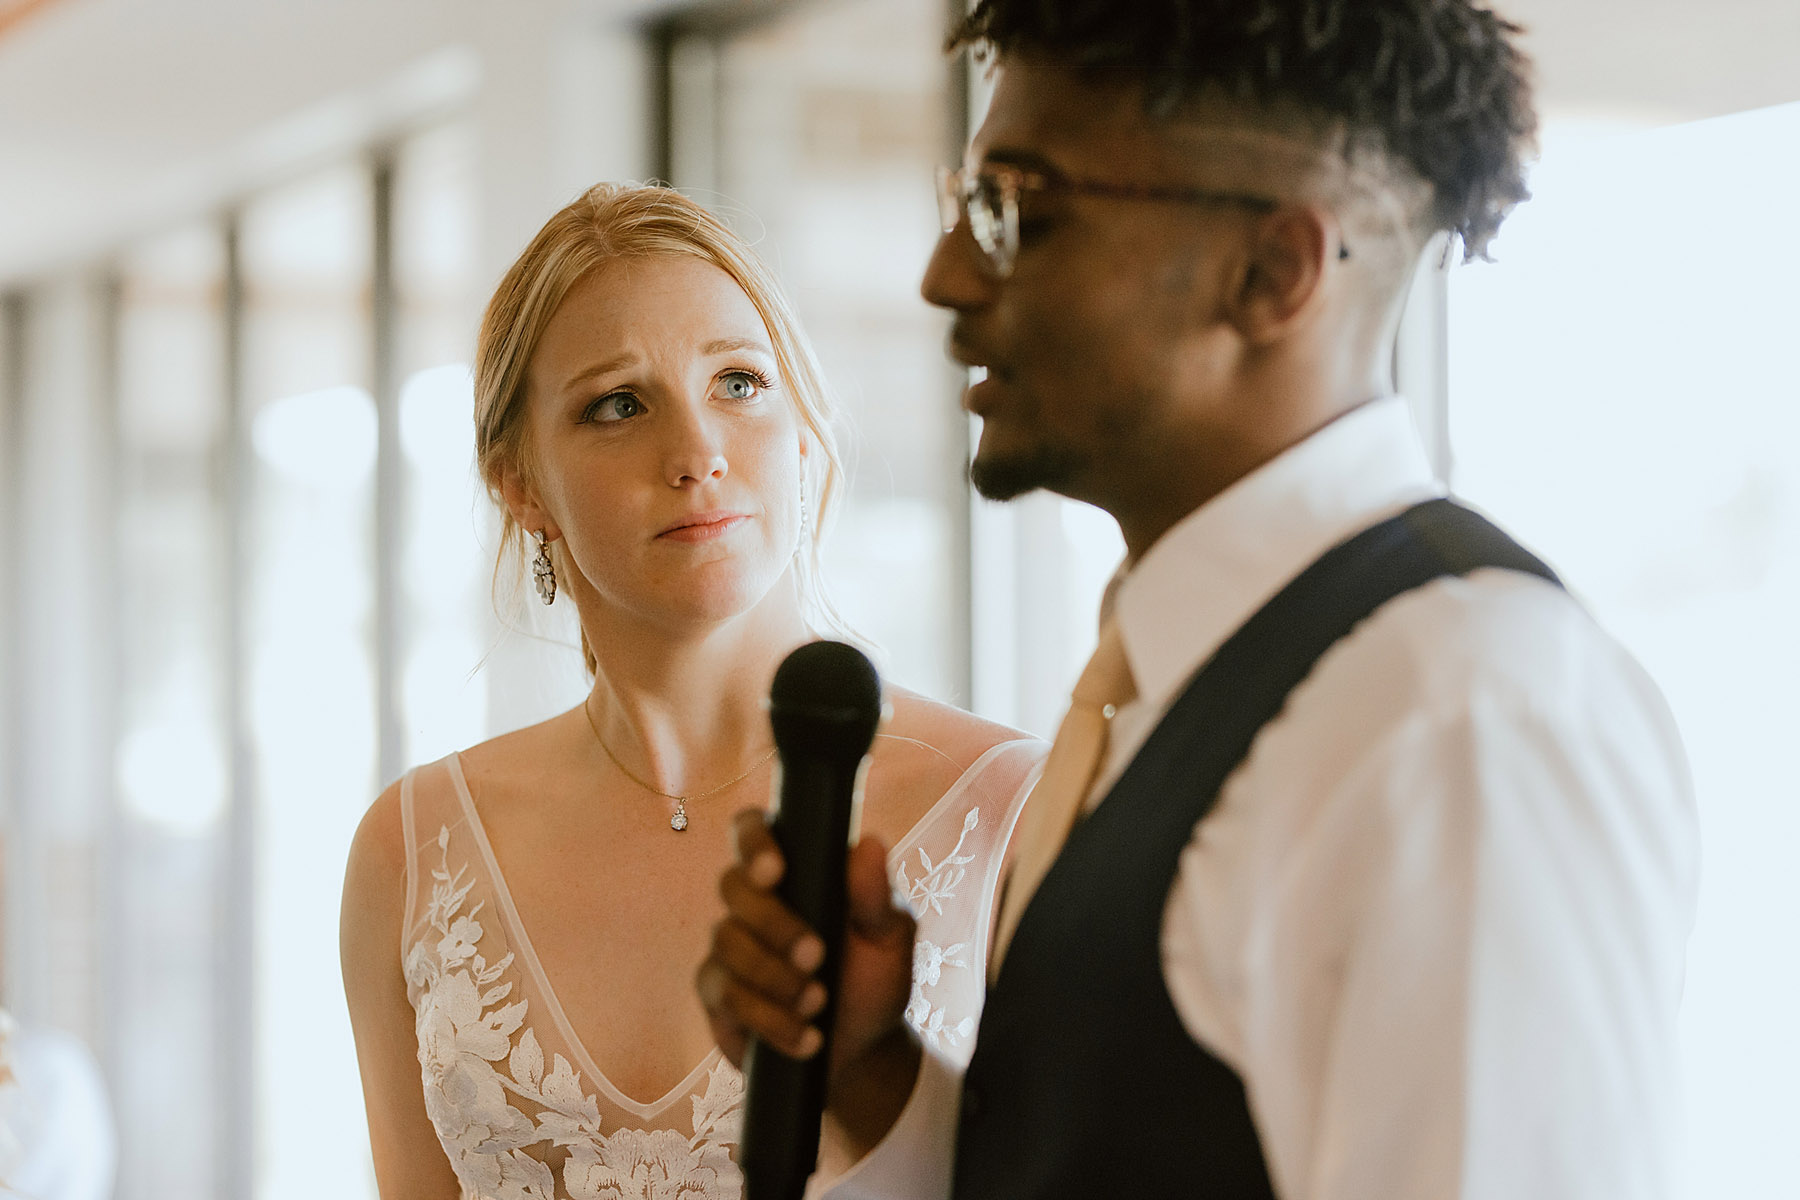 bride stares loving at groom as he speaks with microphone, mixed race couple, wedding day